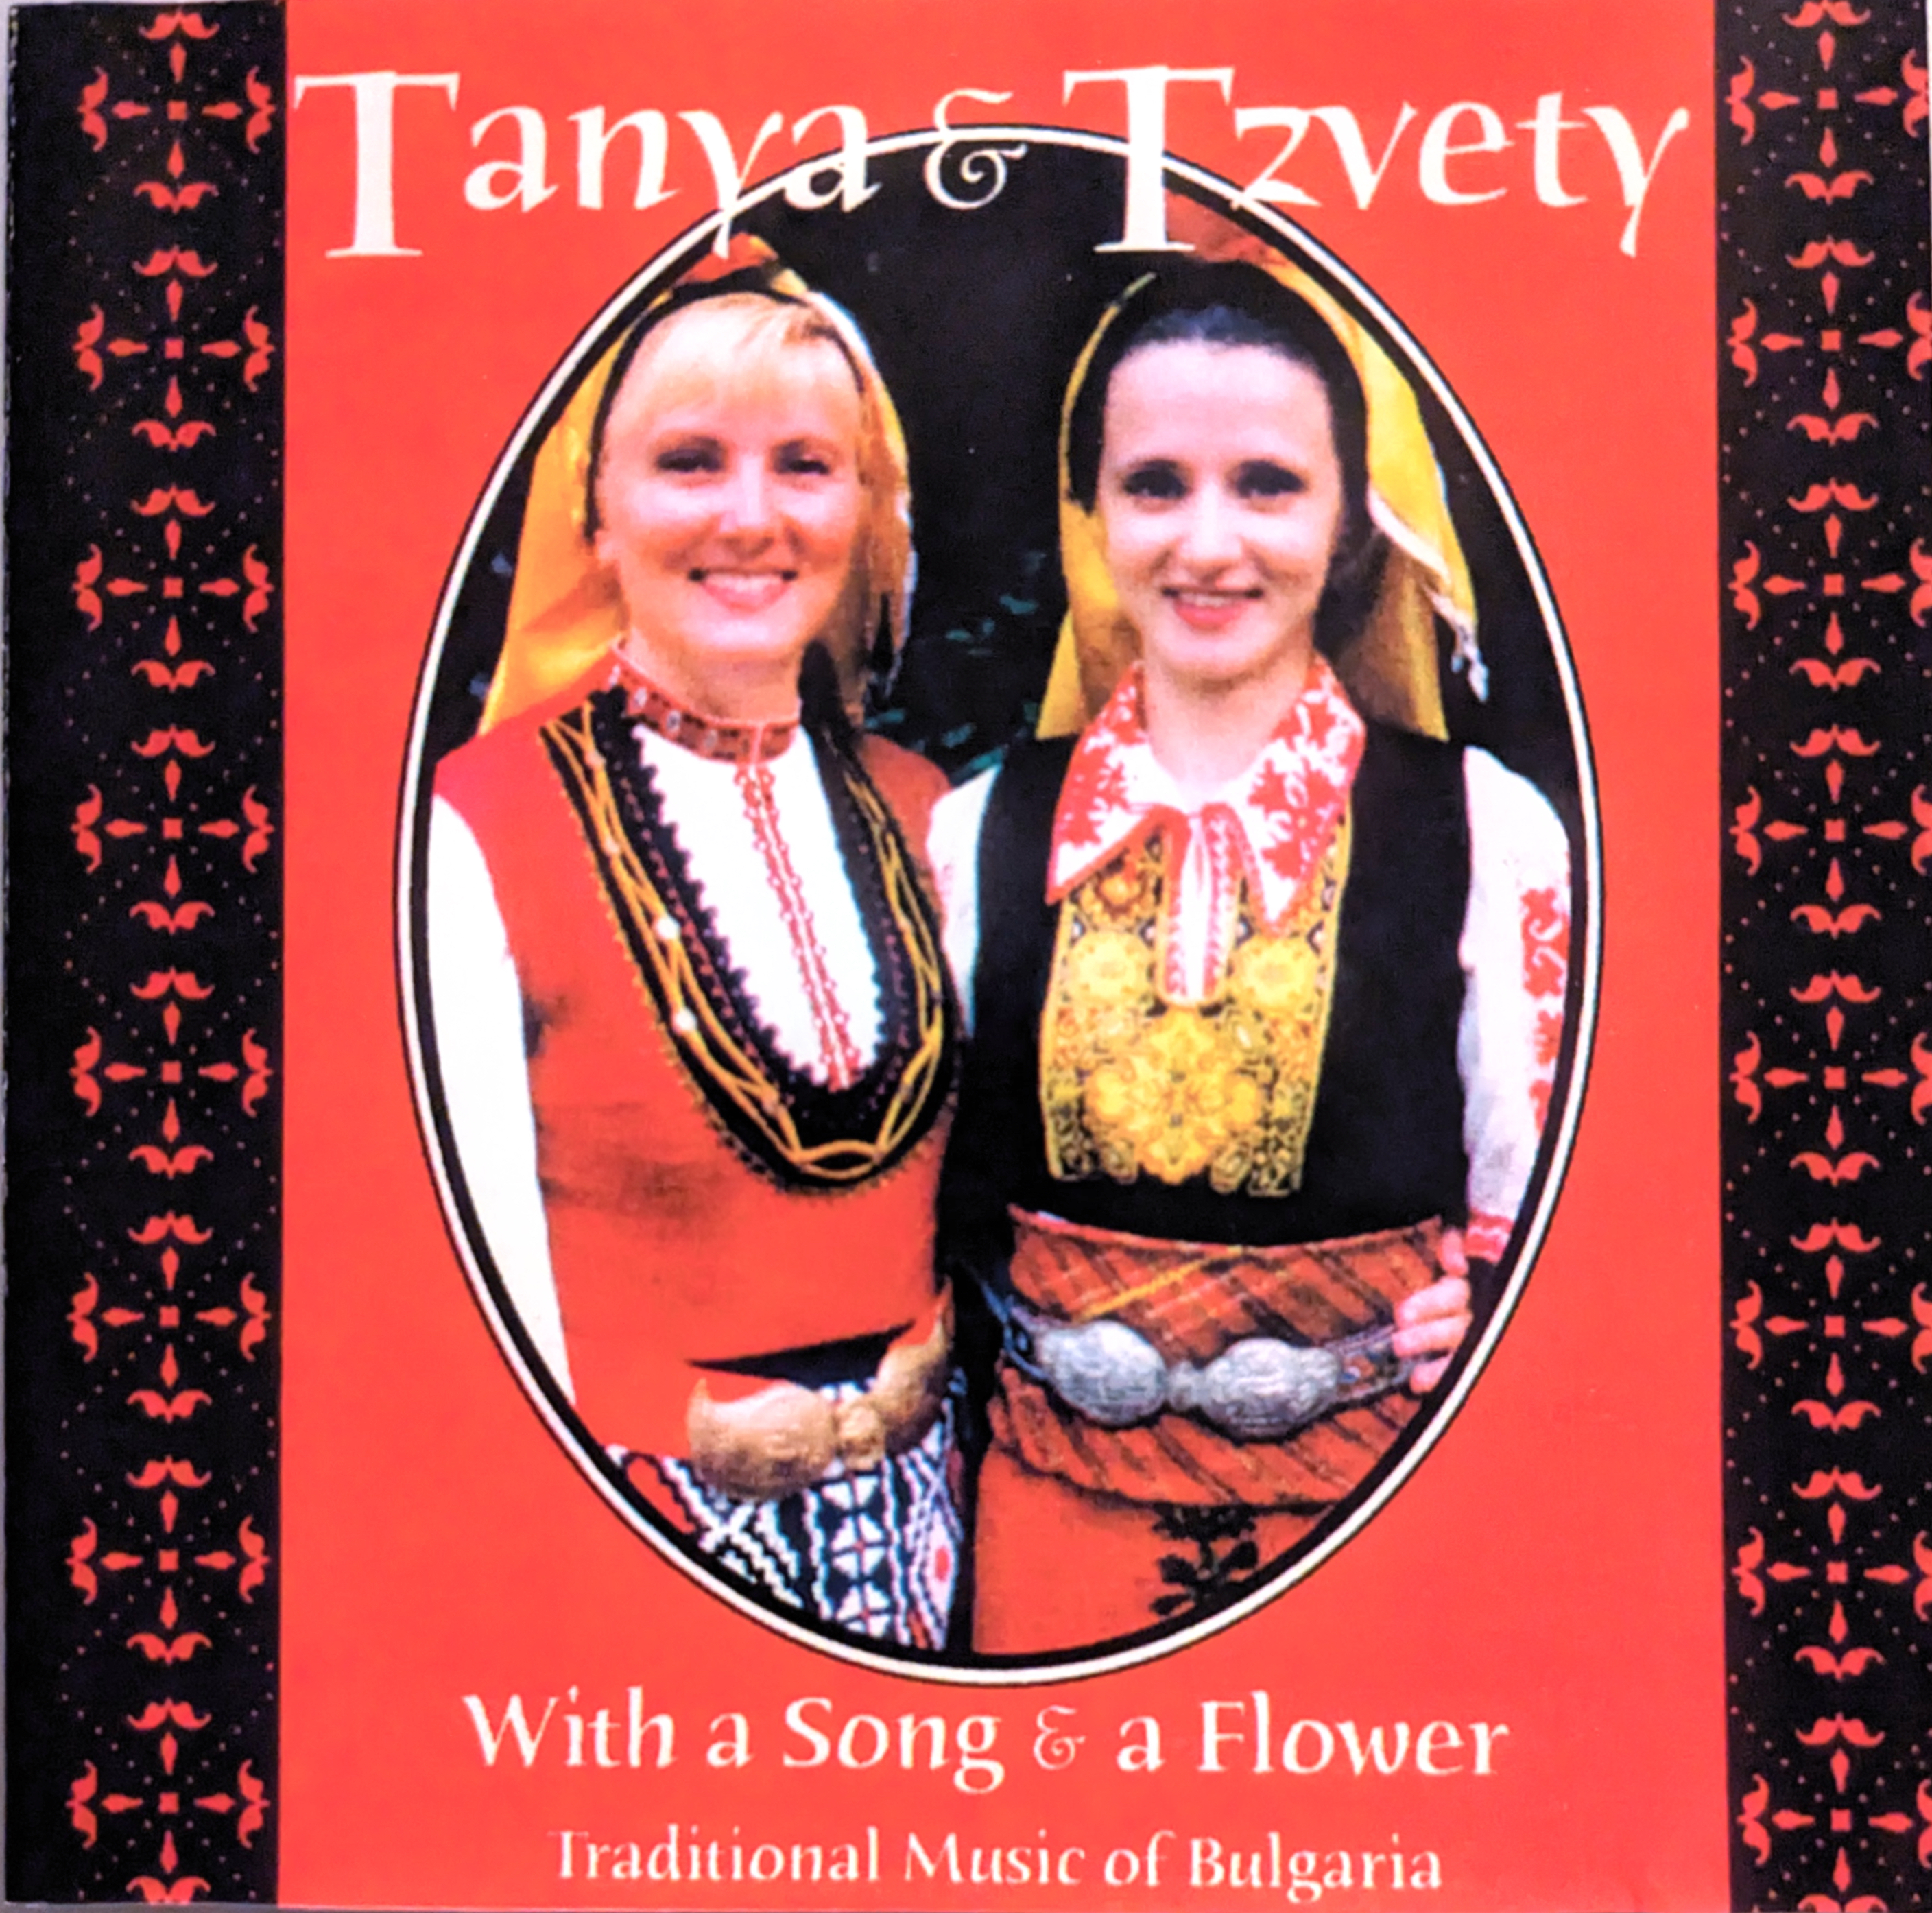 Image of Tanya and Tzvety CD cover showing a woman and her daughter in Bulgarian costumes.